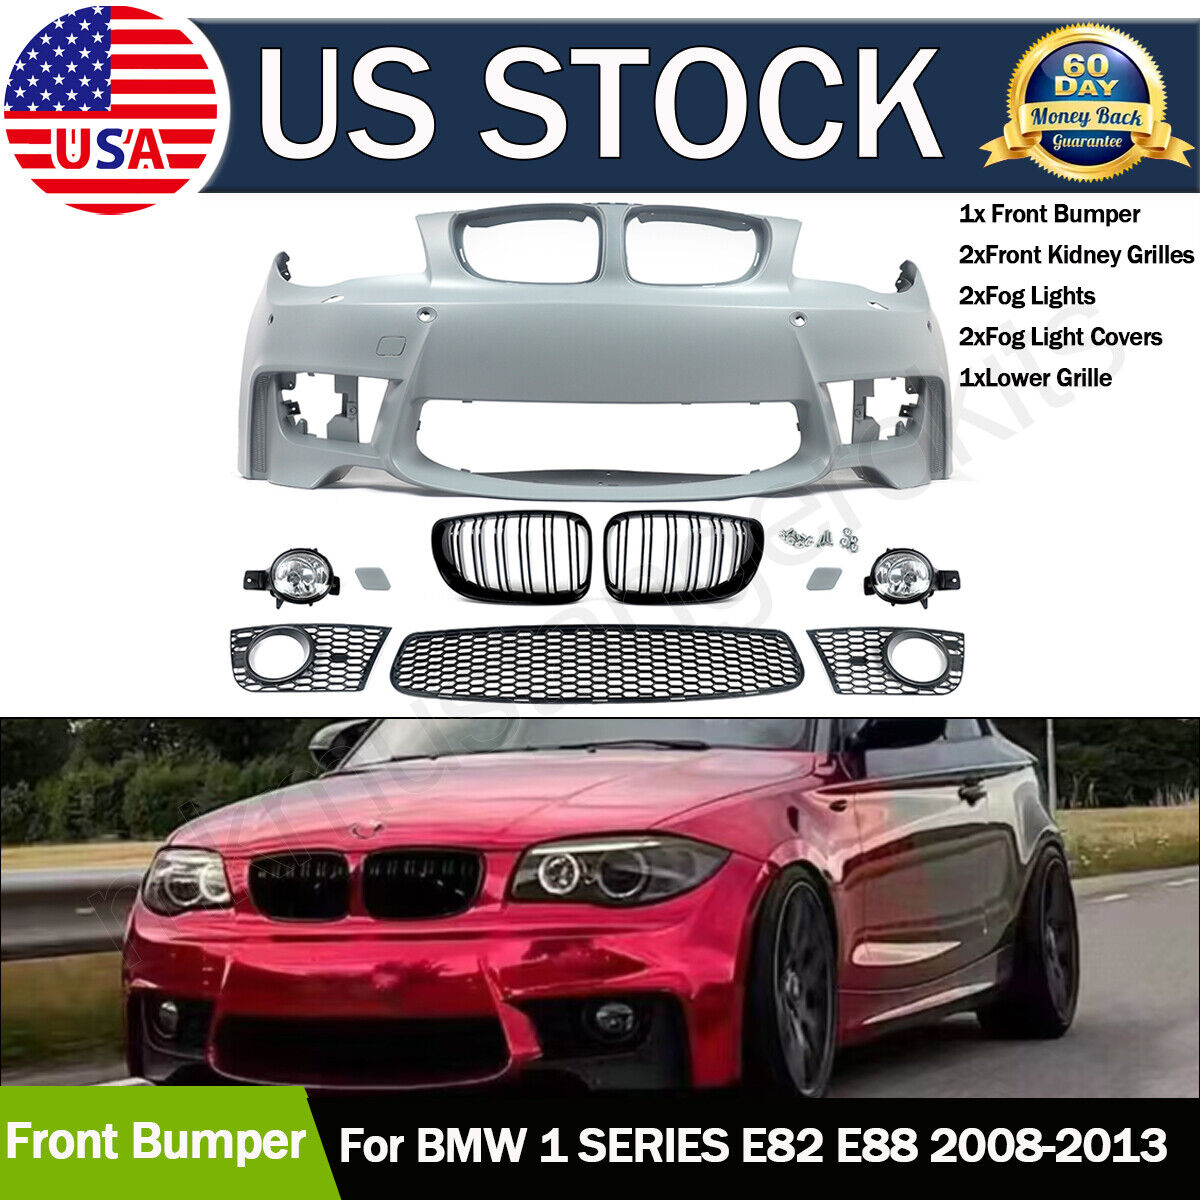 For BMW 1 Series E82 E88 08-2013 1M Style Front Bumper With Fog Lamps & Grilles